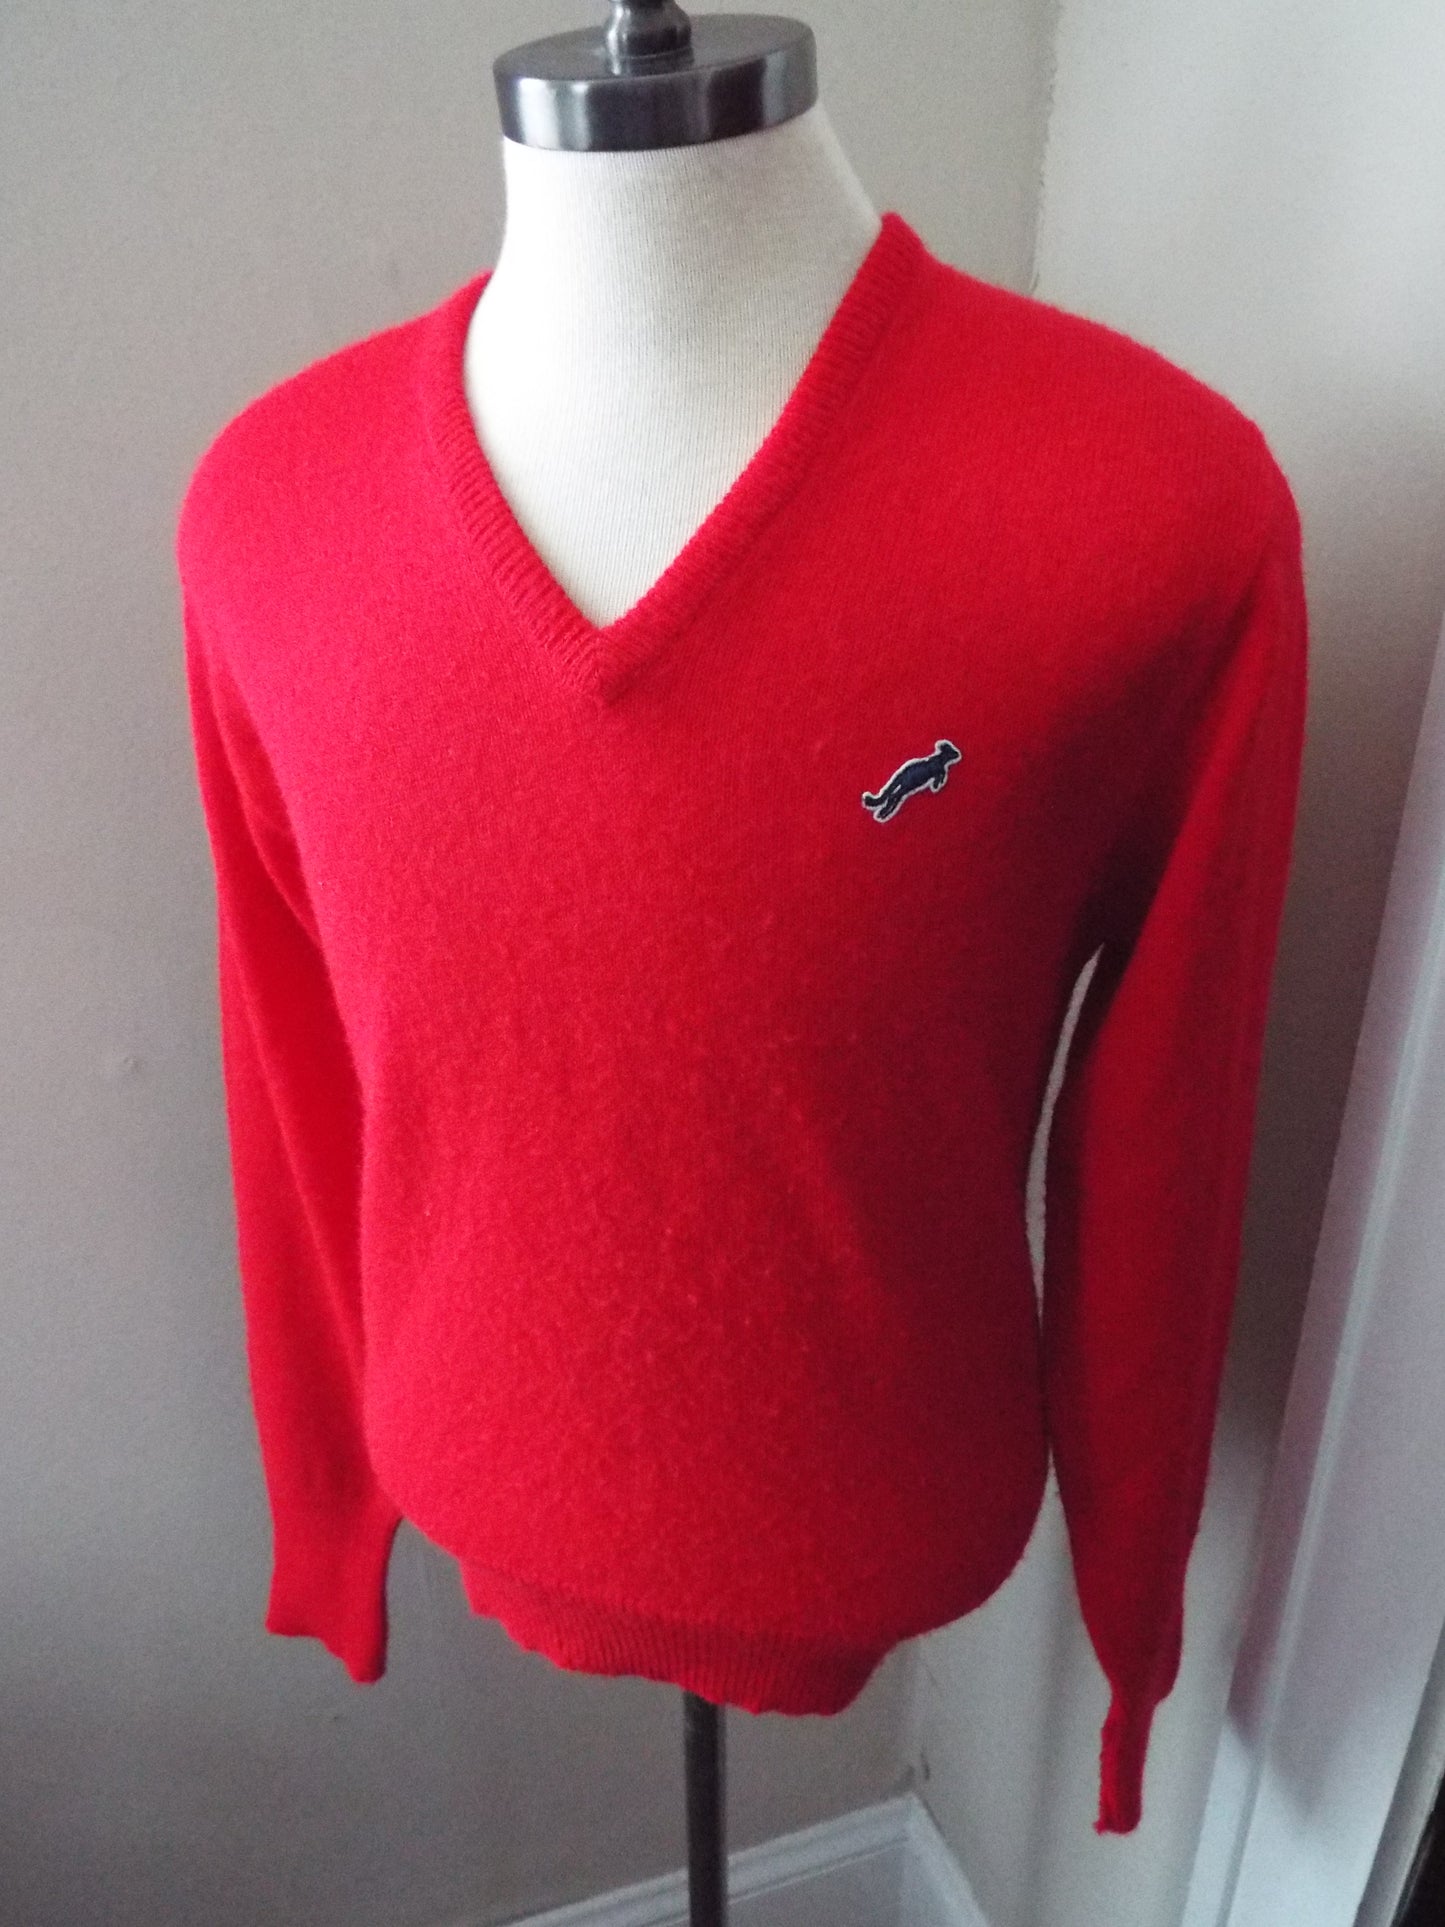 Vintage Long Sleeve Vee Neck Sweater by Down Under